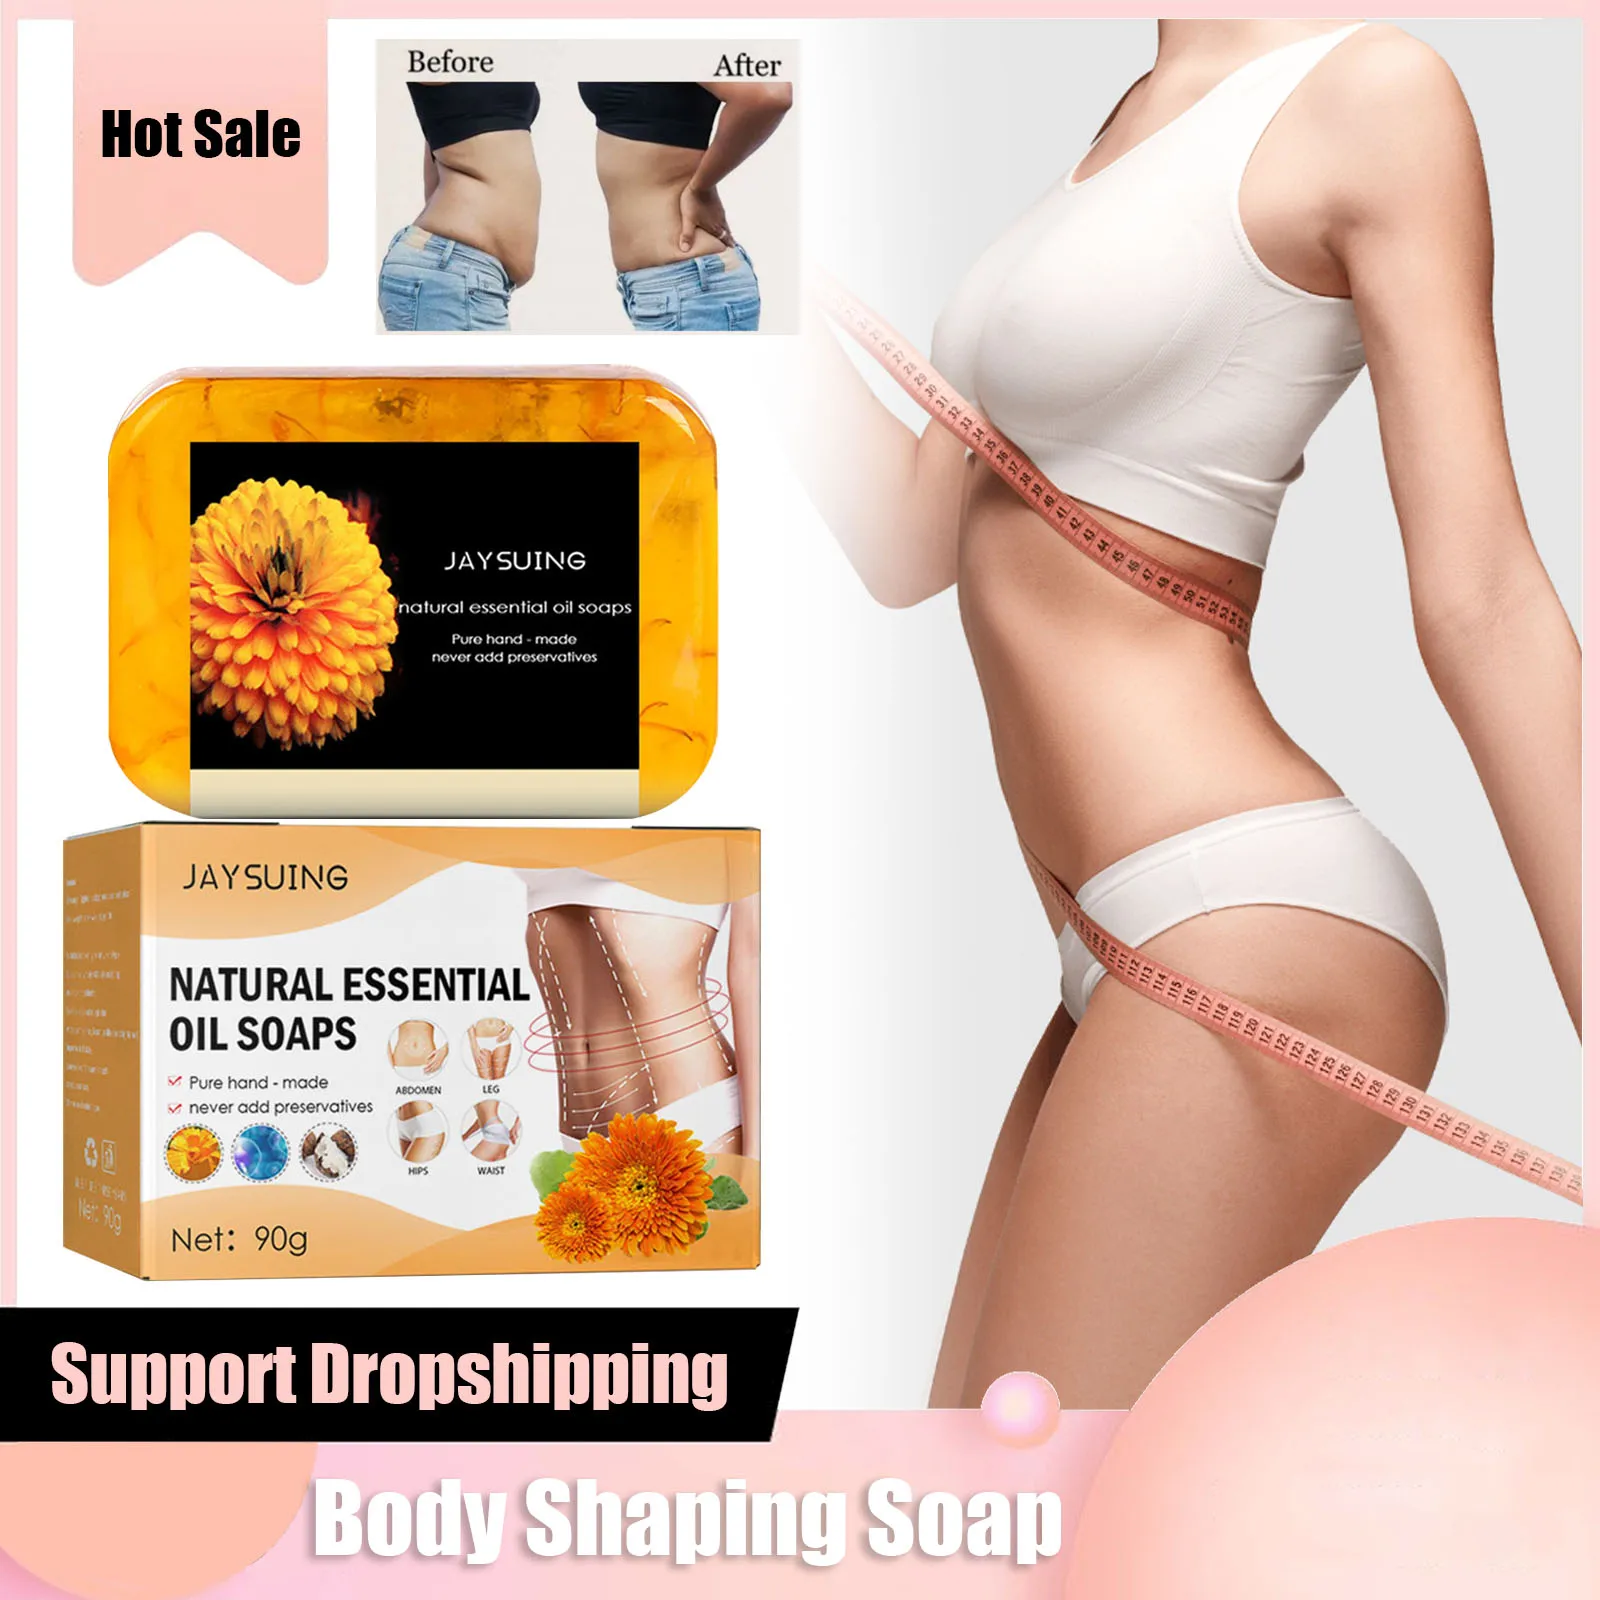 

Firming Body Shaping Soap Weight Loss Skin Moisturizing Deep Cleansing Anti Swelling Cellulite Slimming Fat Burning Soap 90g